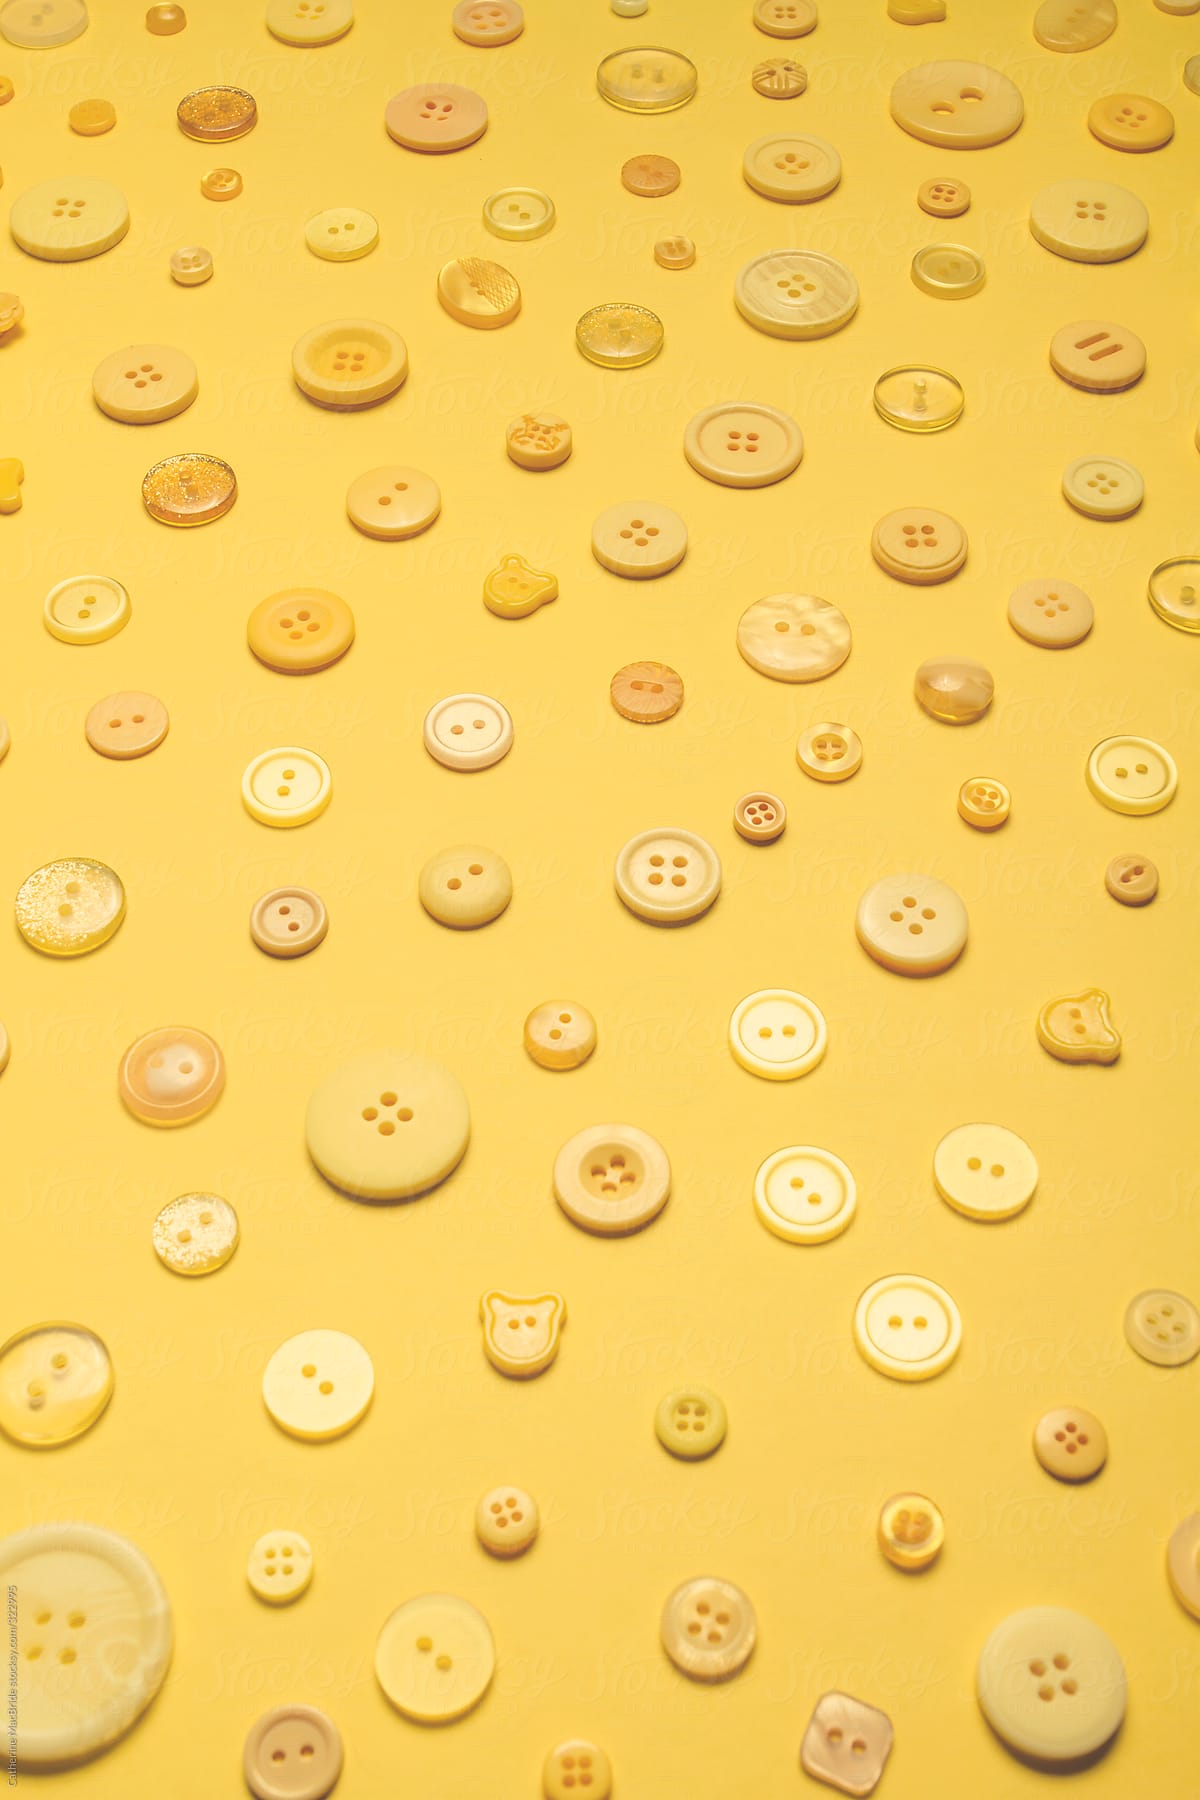 All yellow buttons a collection